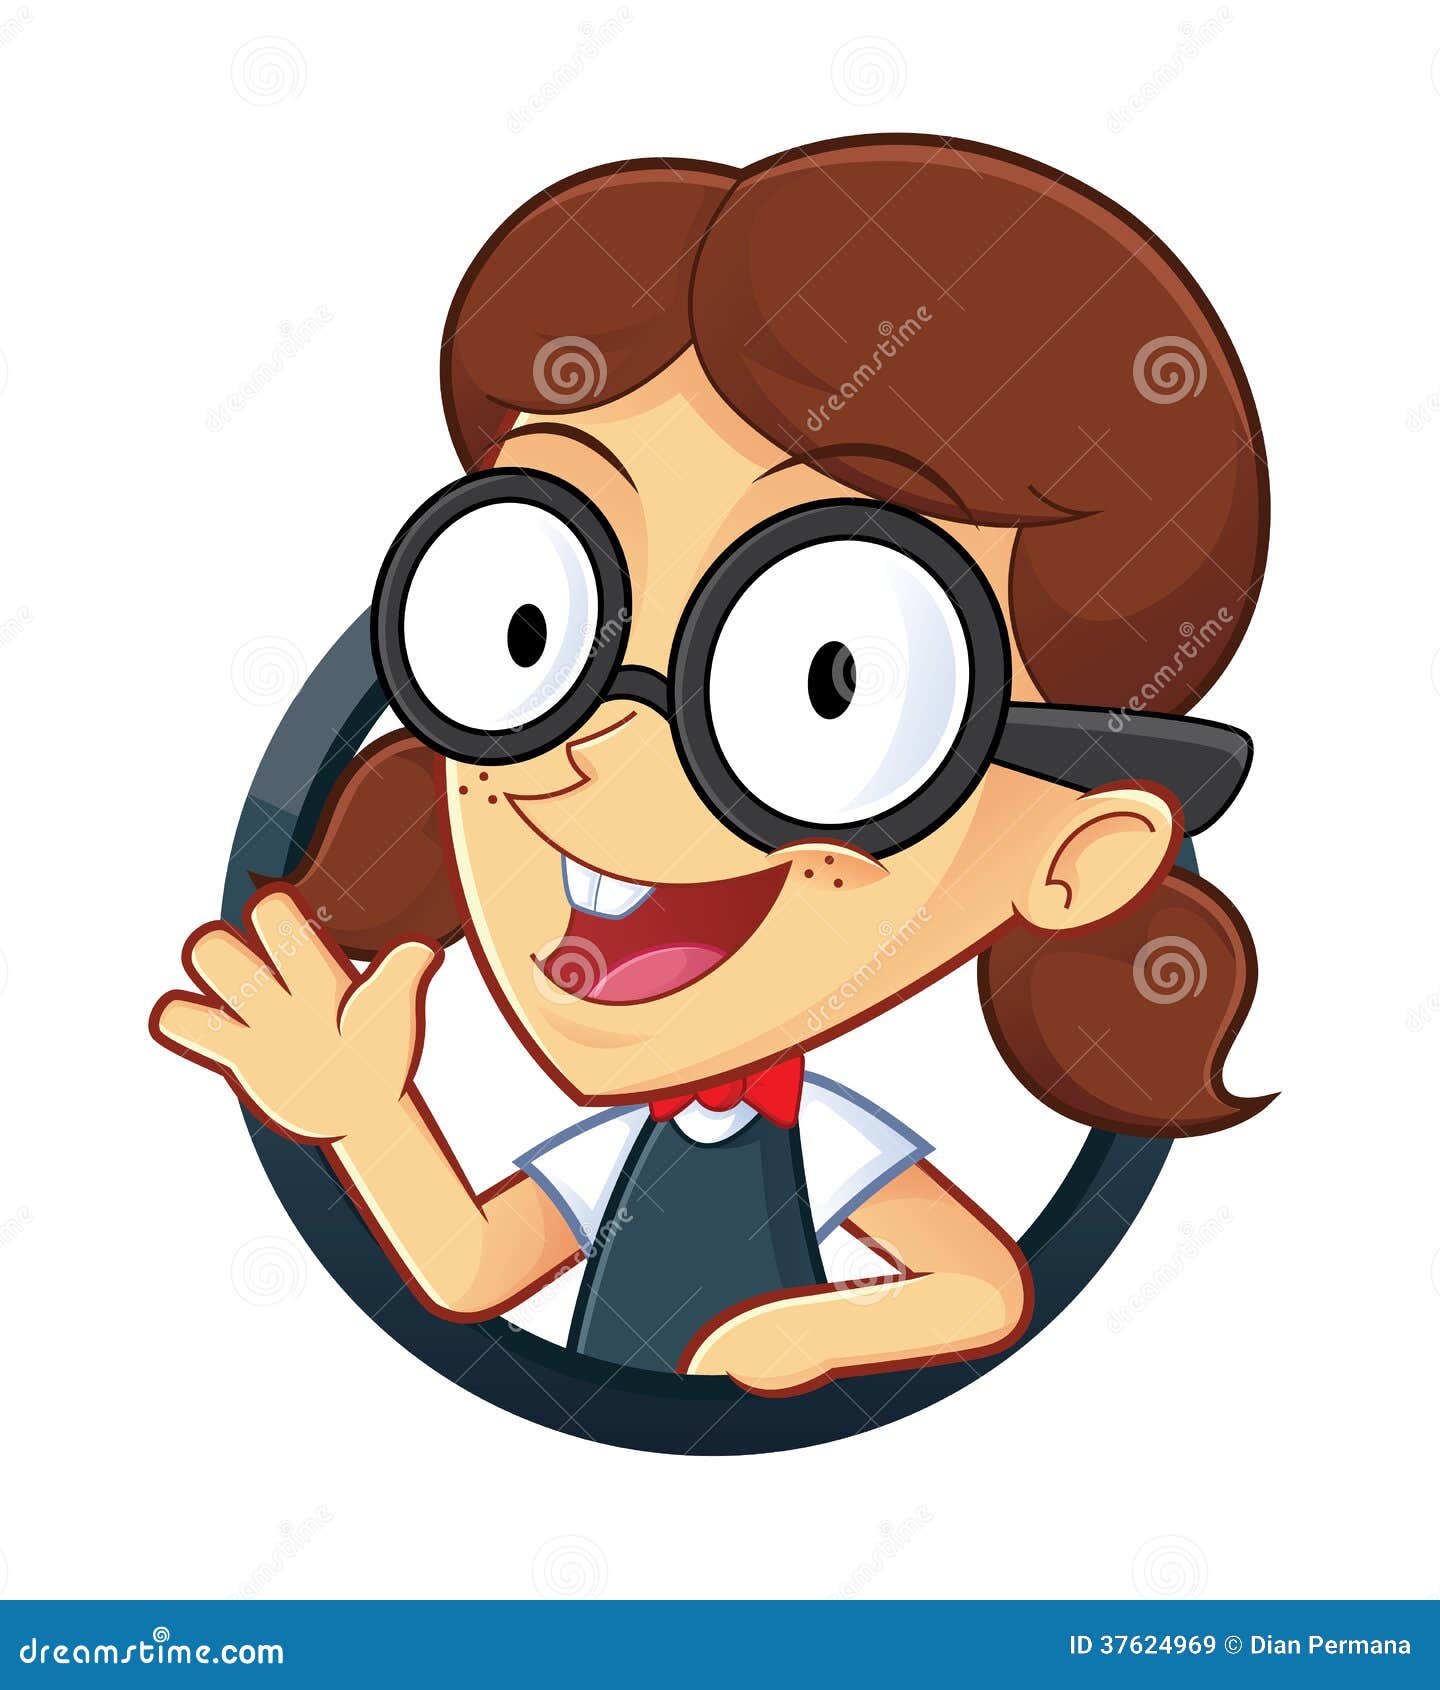 clipart girl with glasses - photo #7